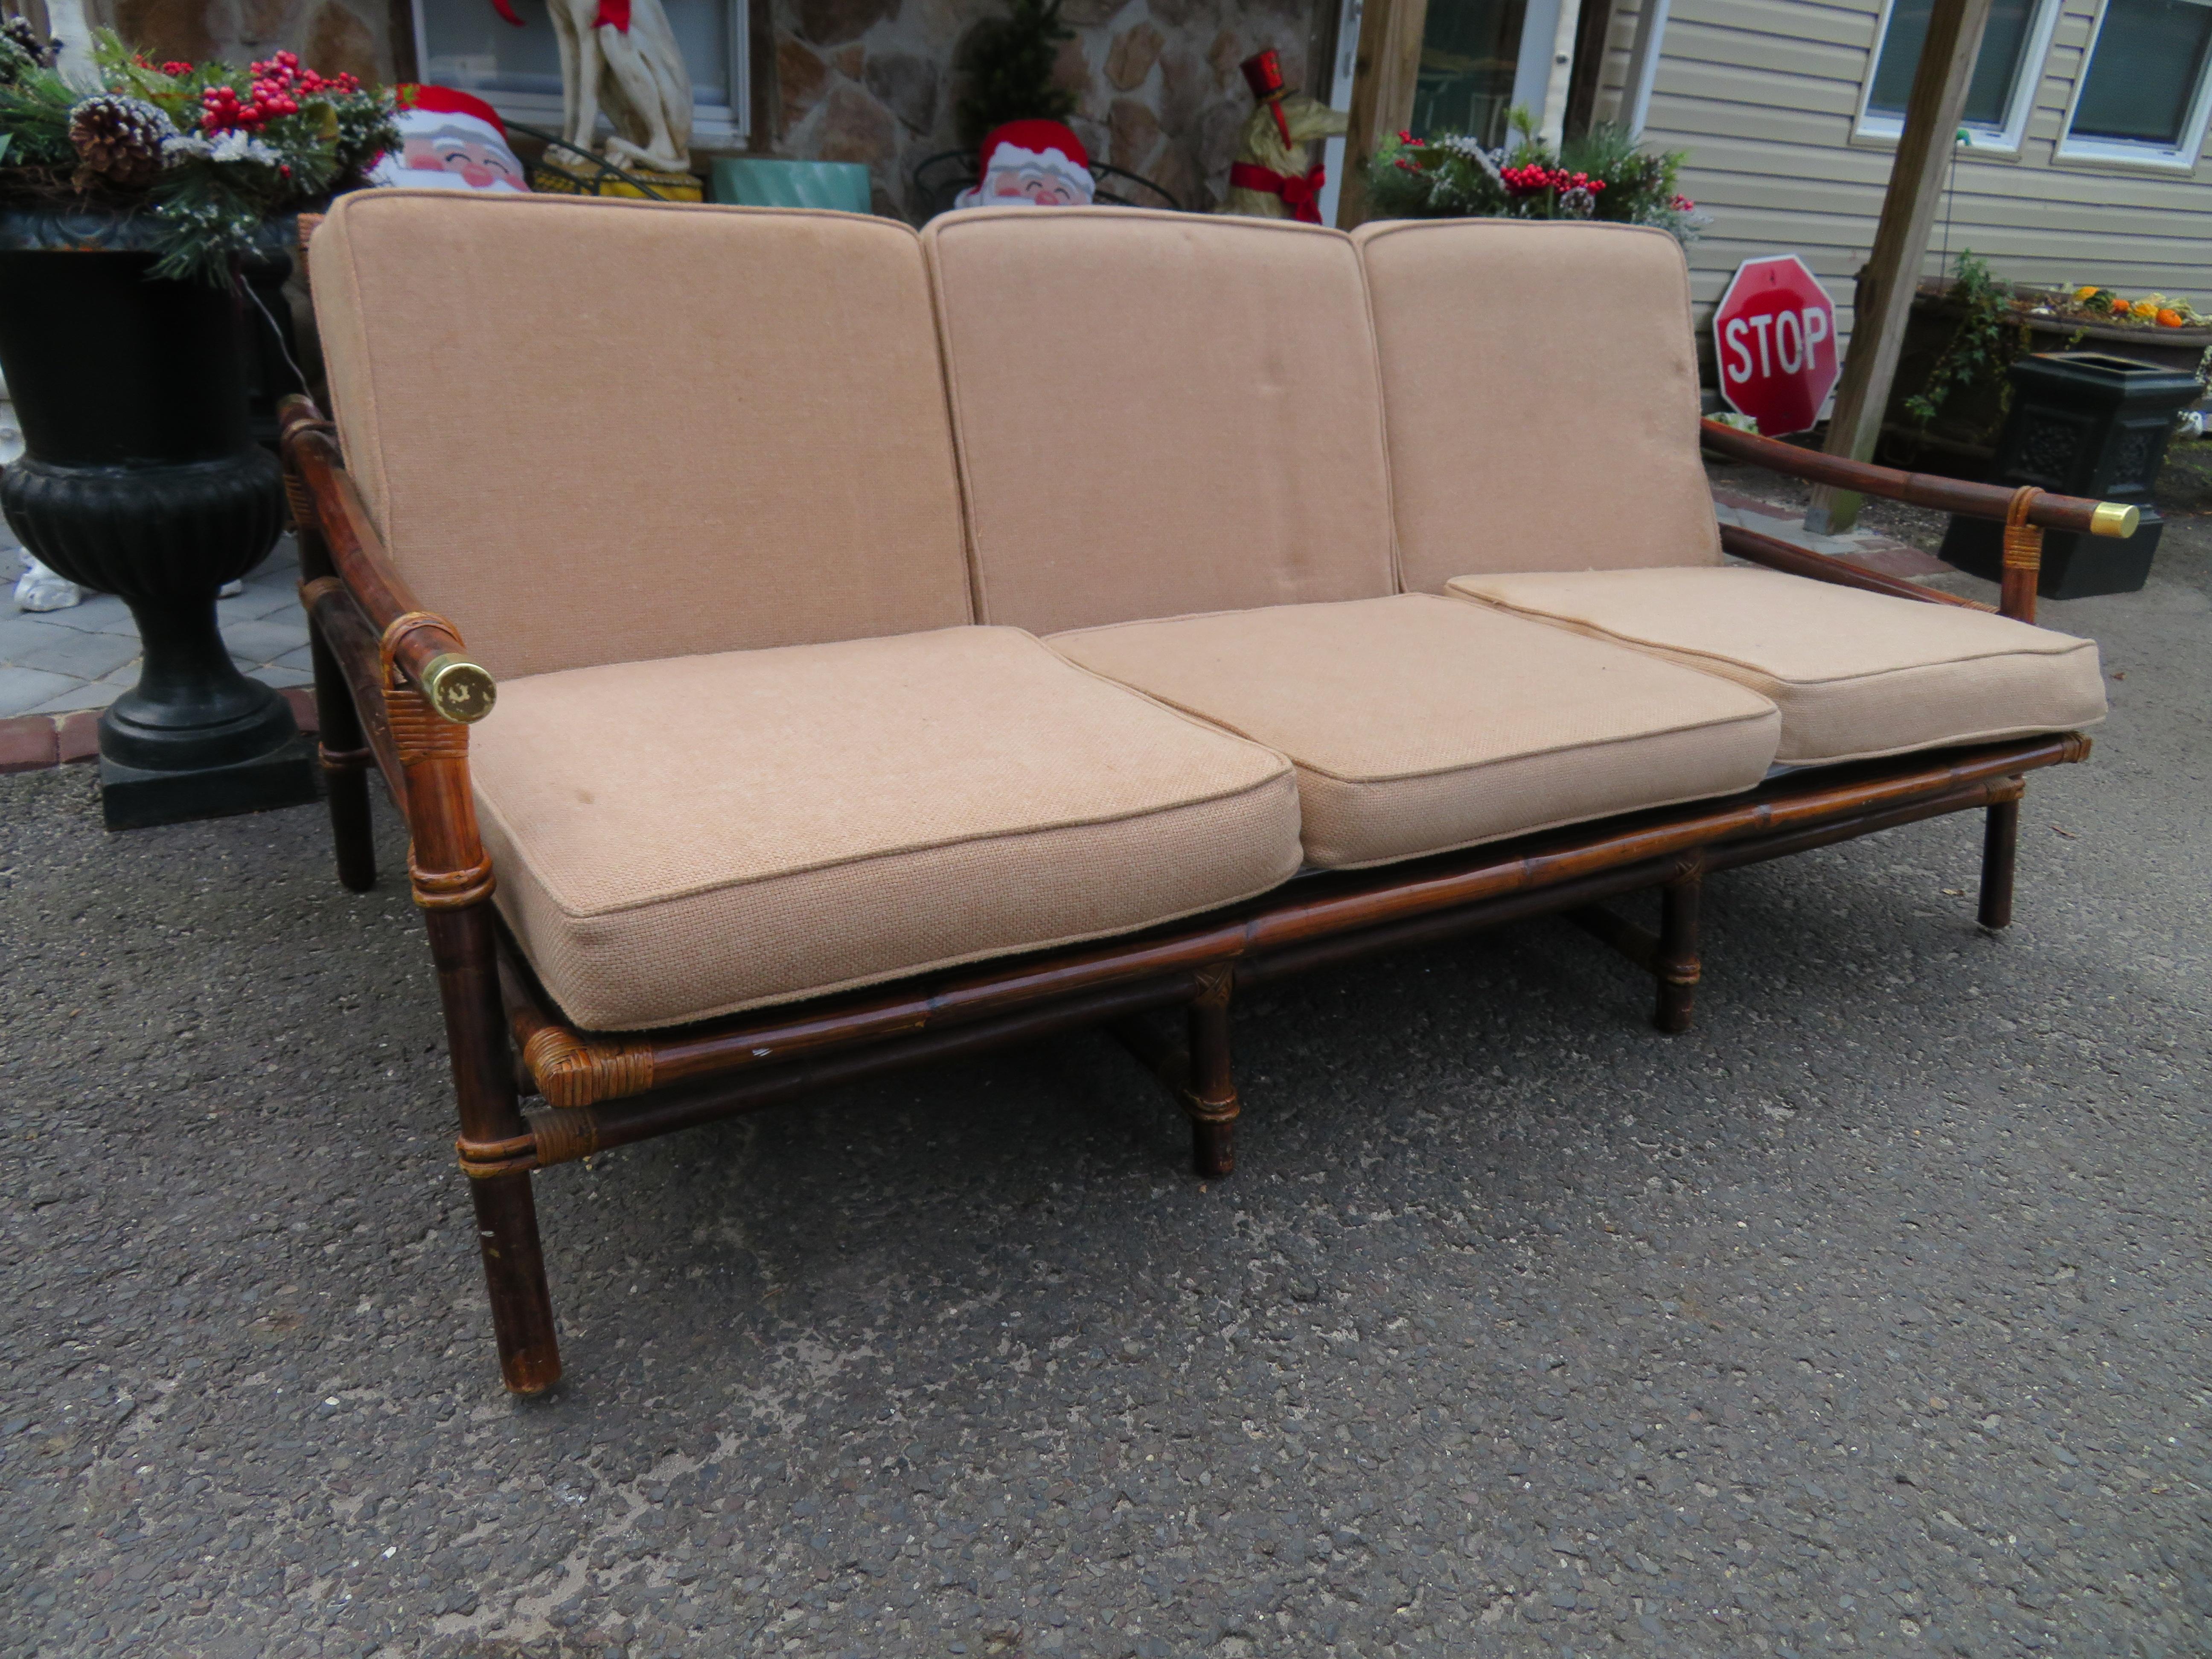 Wonderful vintage rattan Campaign style Ficks reed Far Horizon Collection sofa designed by John Wisner. We love the warm light brown bamboo color on this piece matching other pieces from this collection that we have. The cushions are still soft and